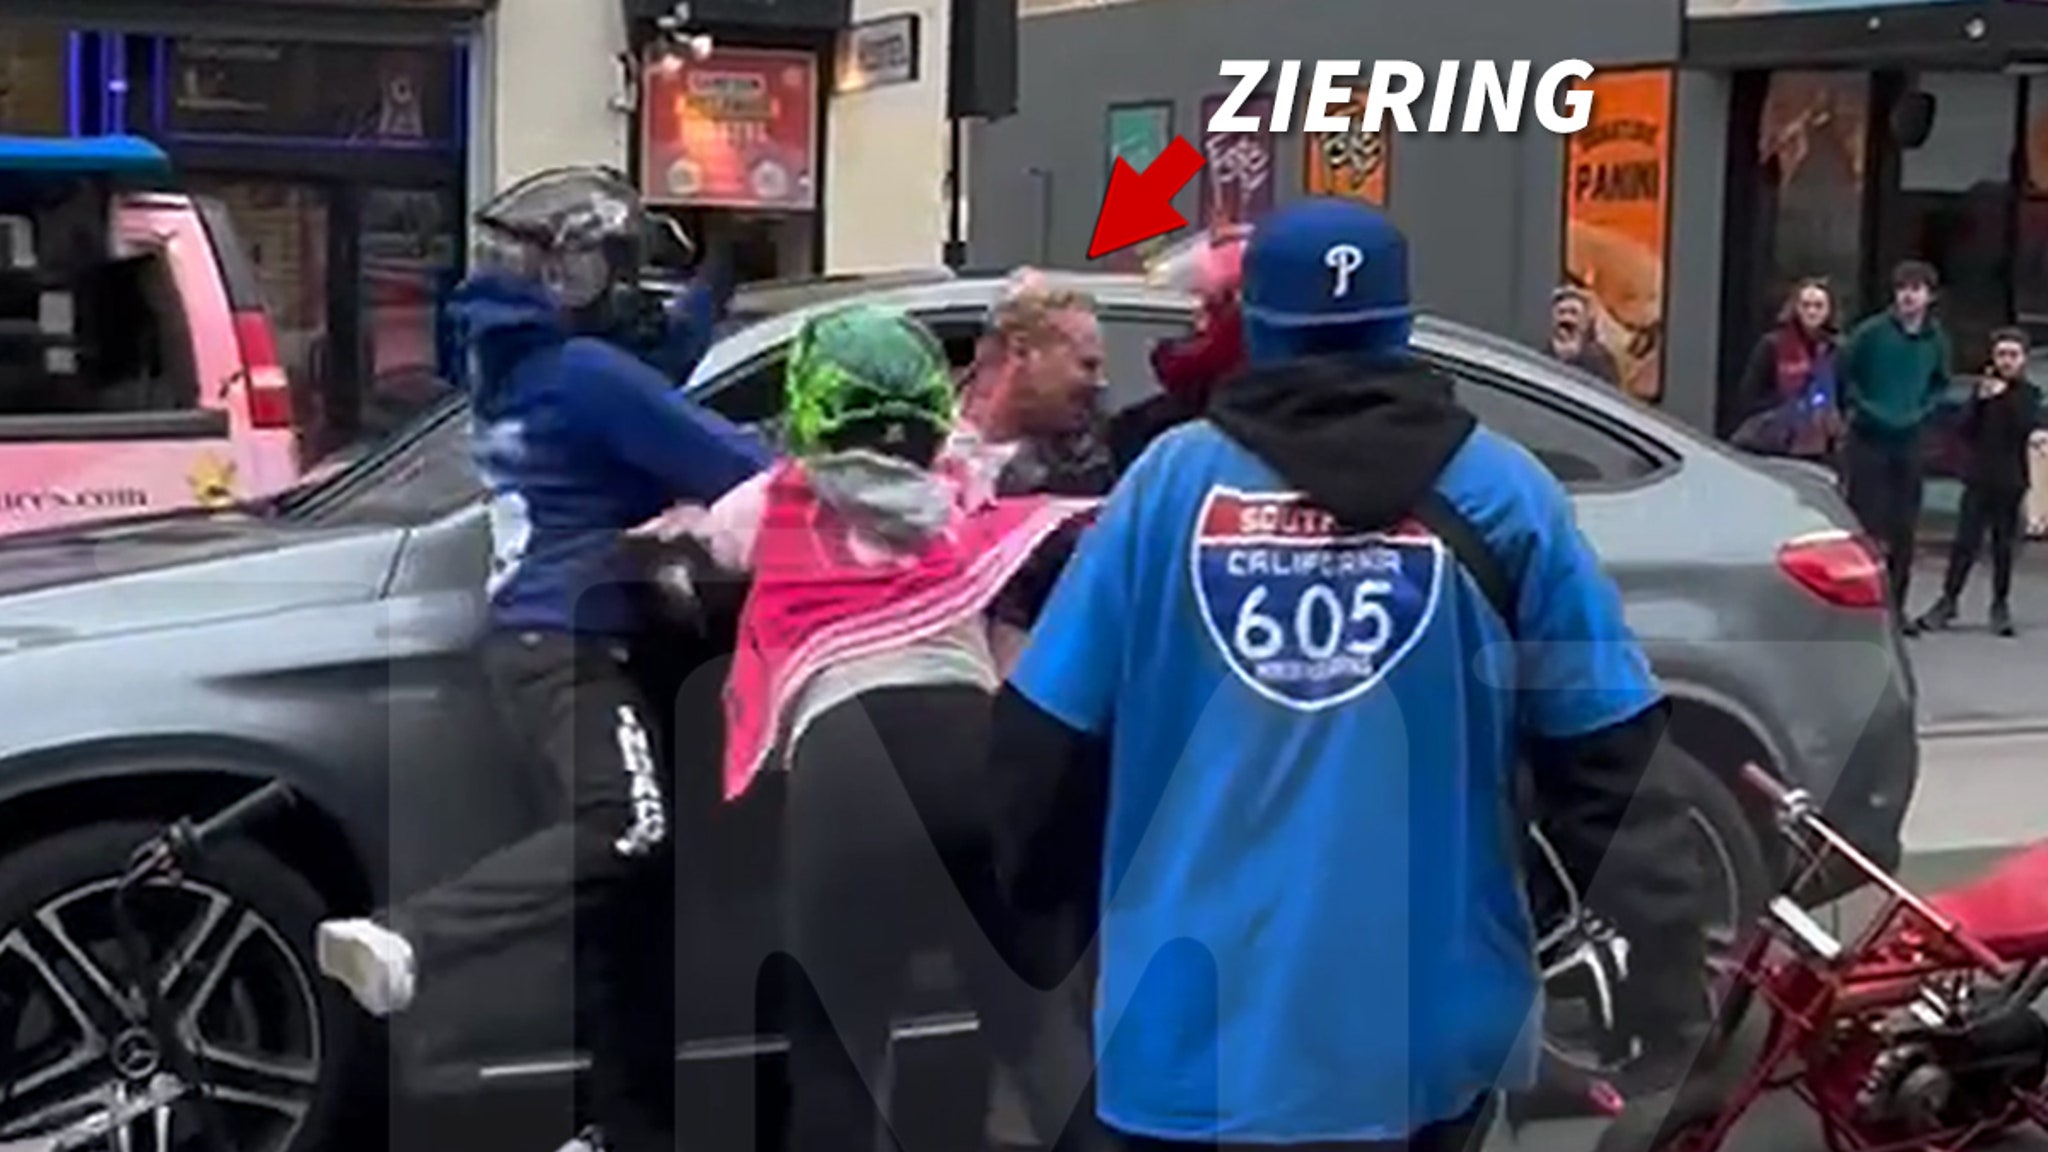 ‘90210’ Star Ian Ziering Viciously Attacked by Bikers on Hollywood Blvd.